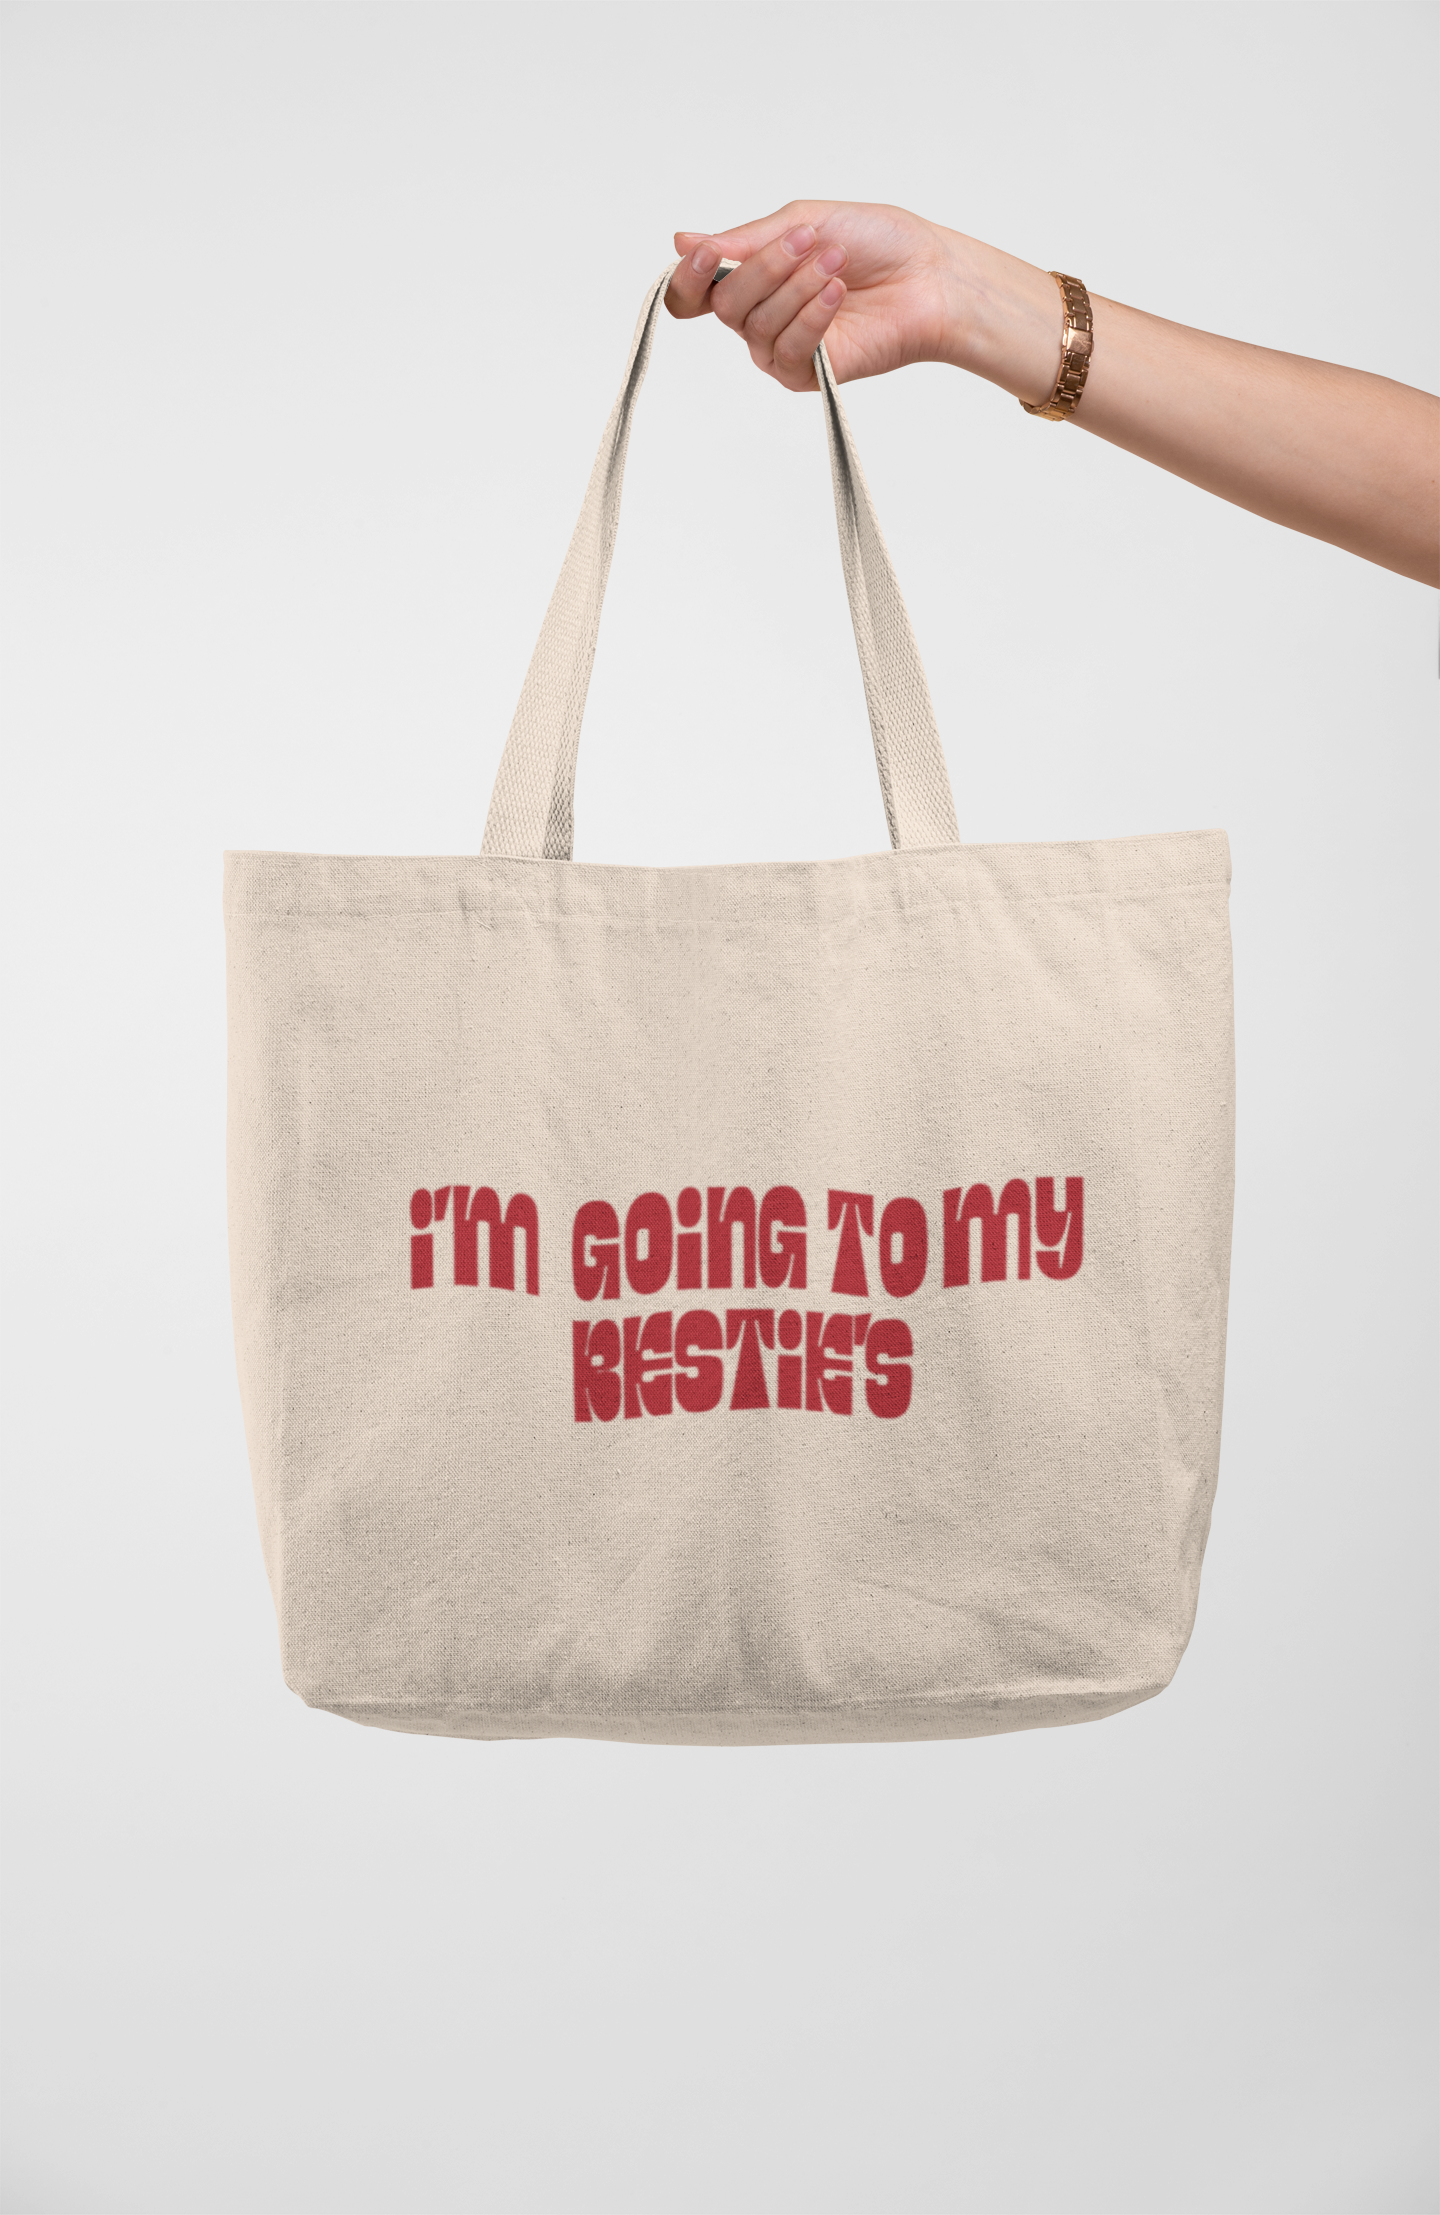 “I’m going to my Bestie’s” Large Tote